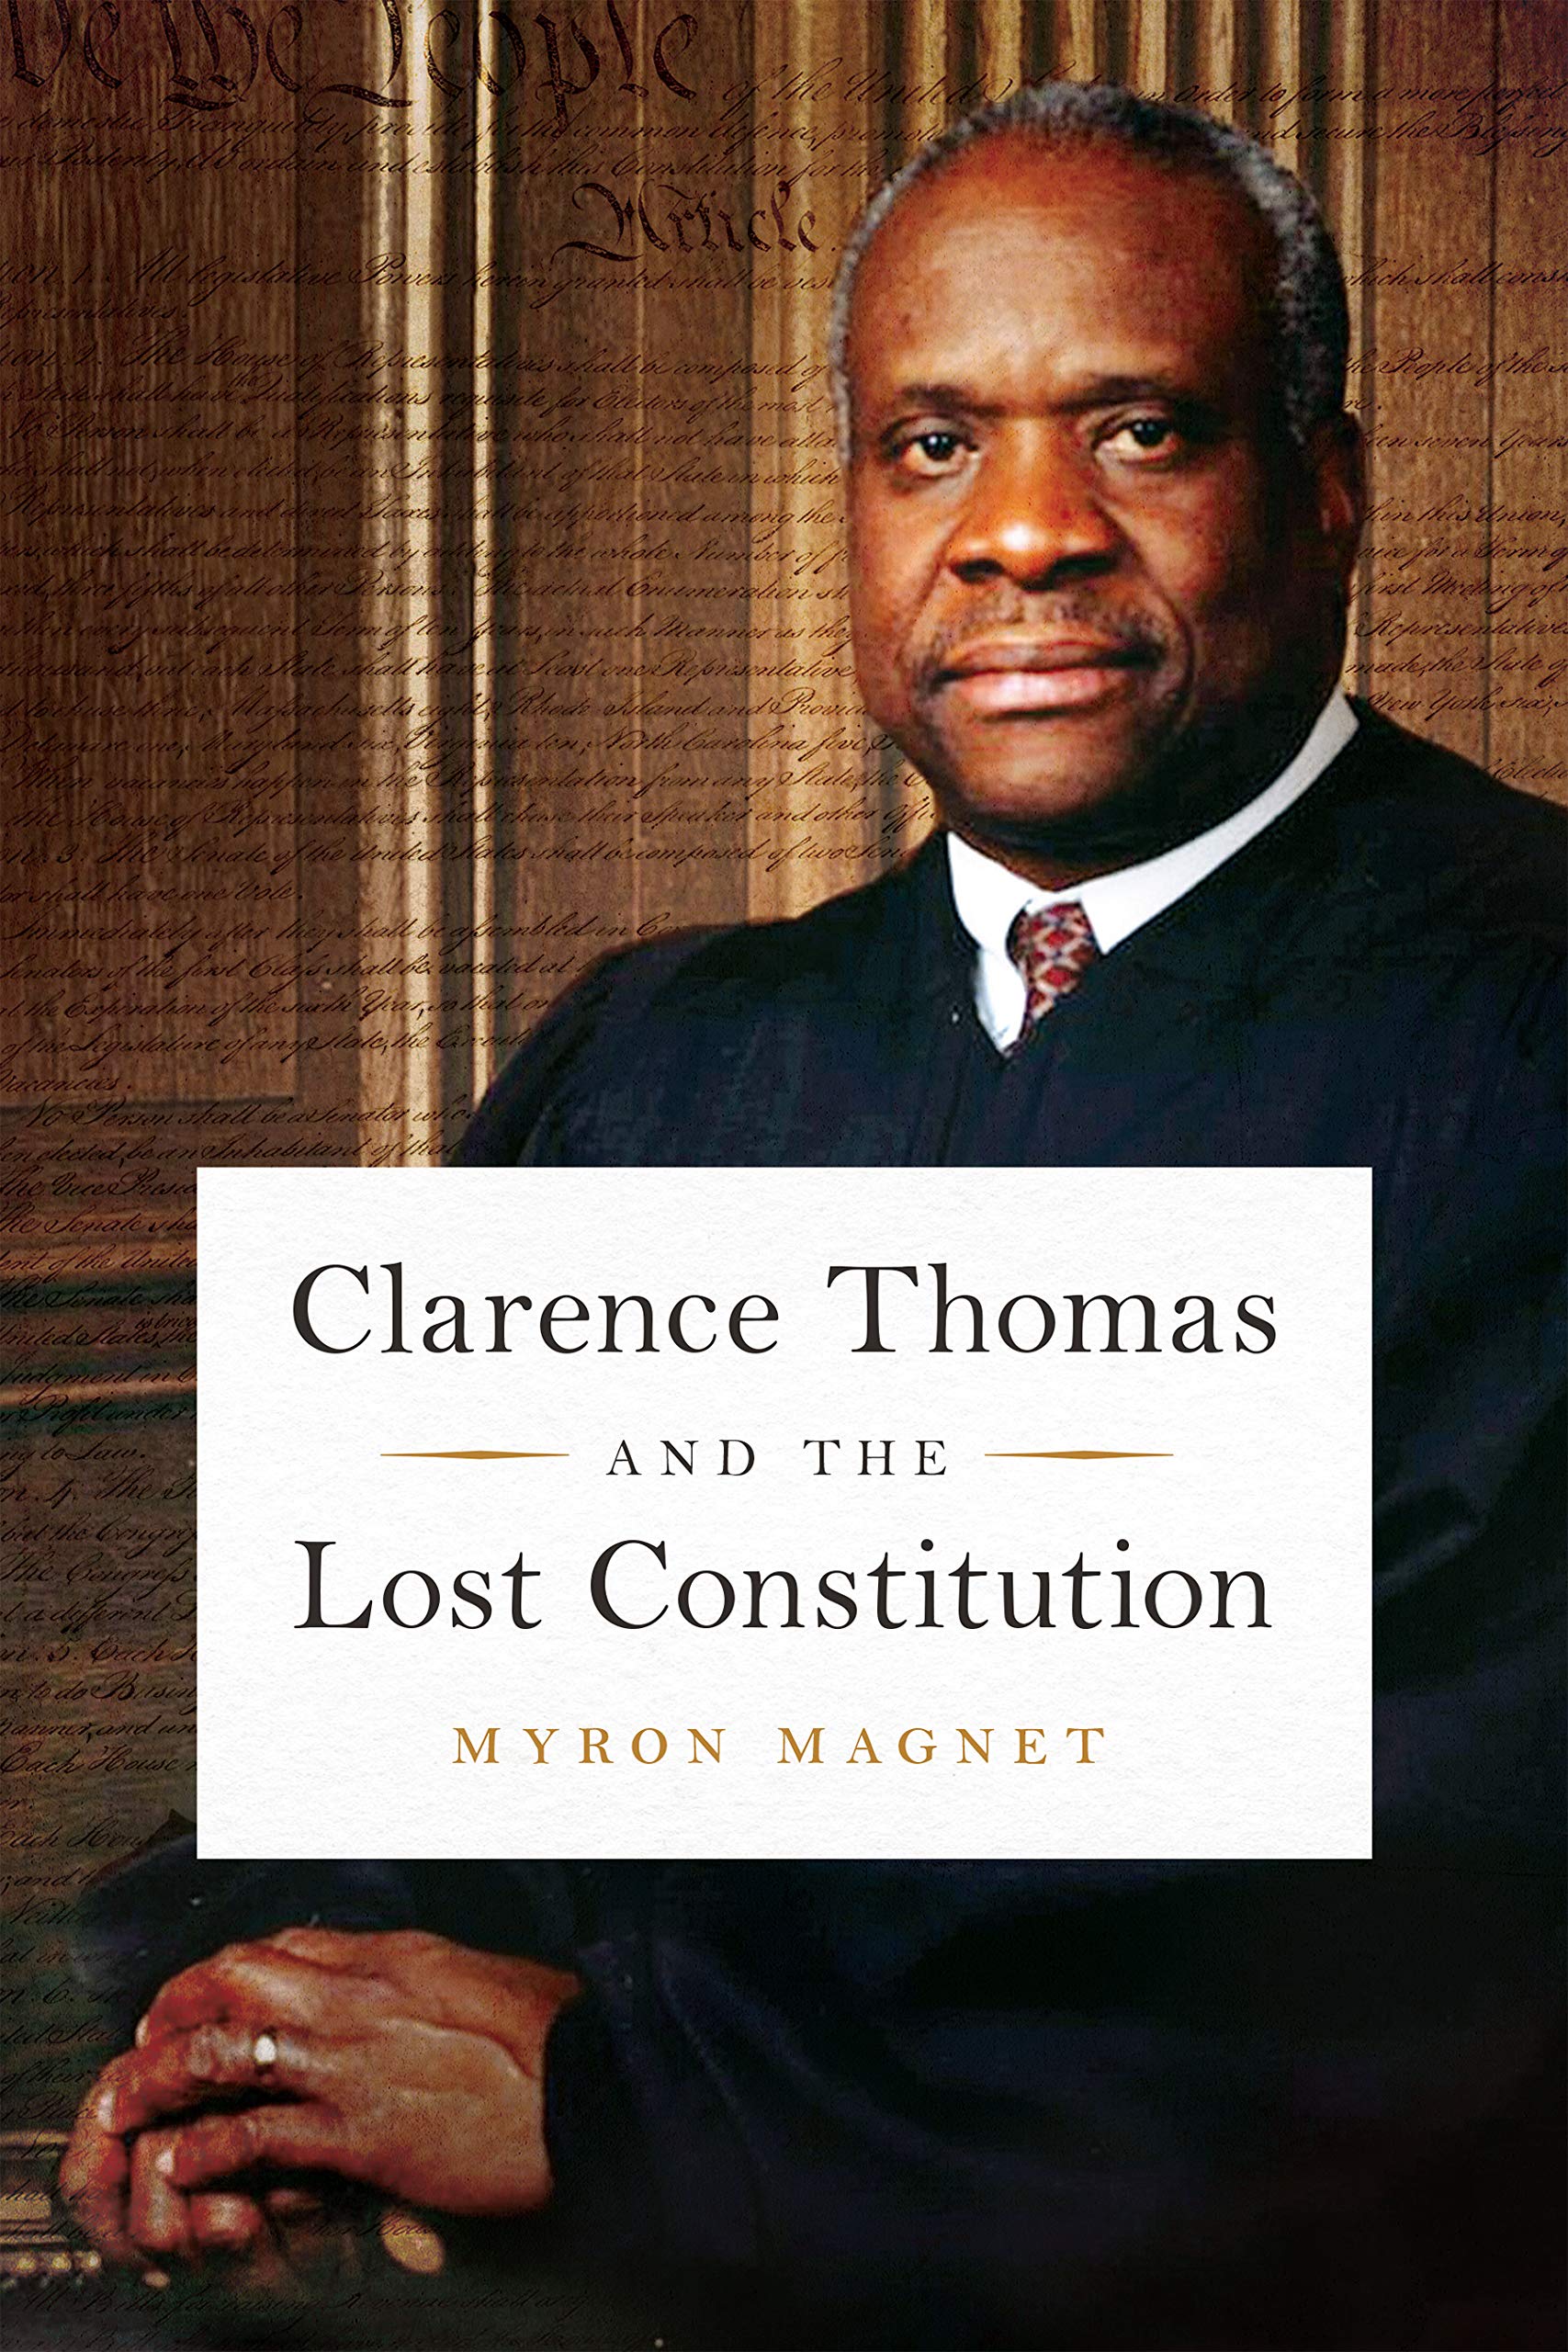 Clarence Thomas, Biography & Facts